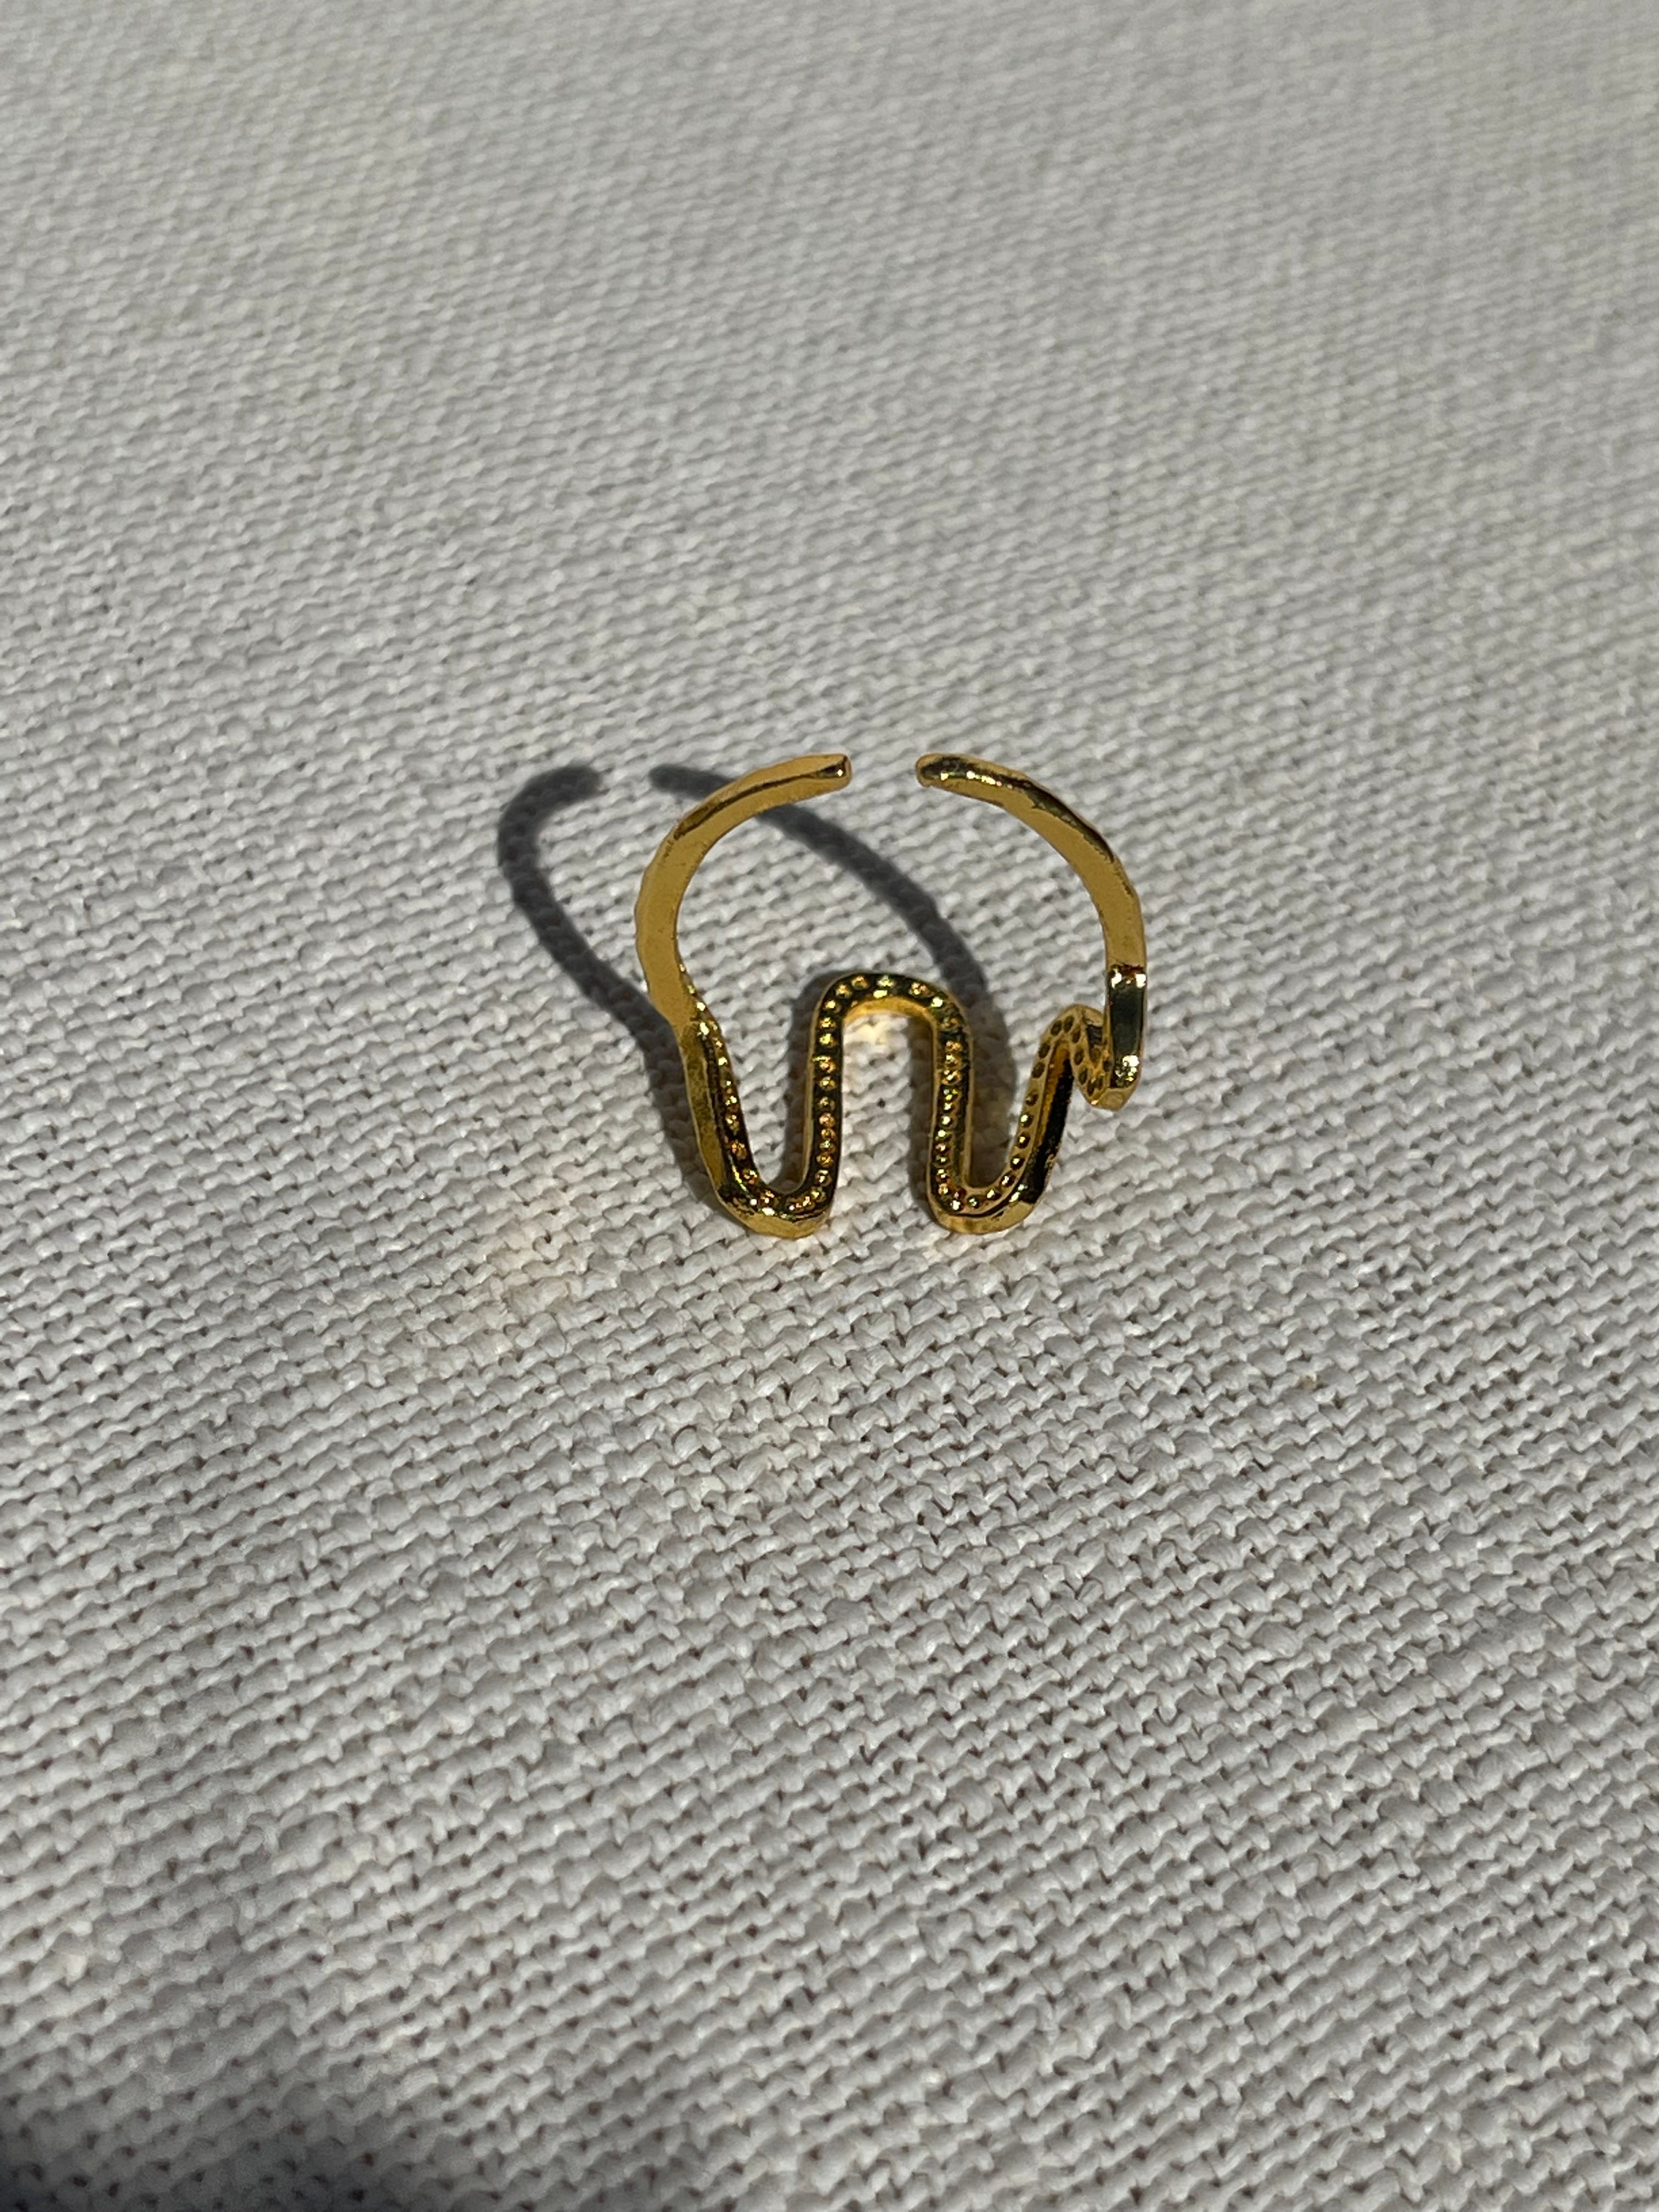 the | Sibi | ring  Sage + Gold Roots